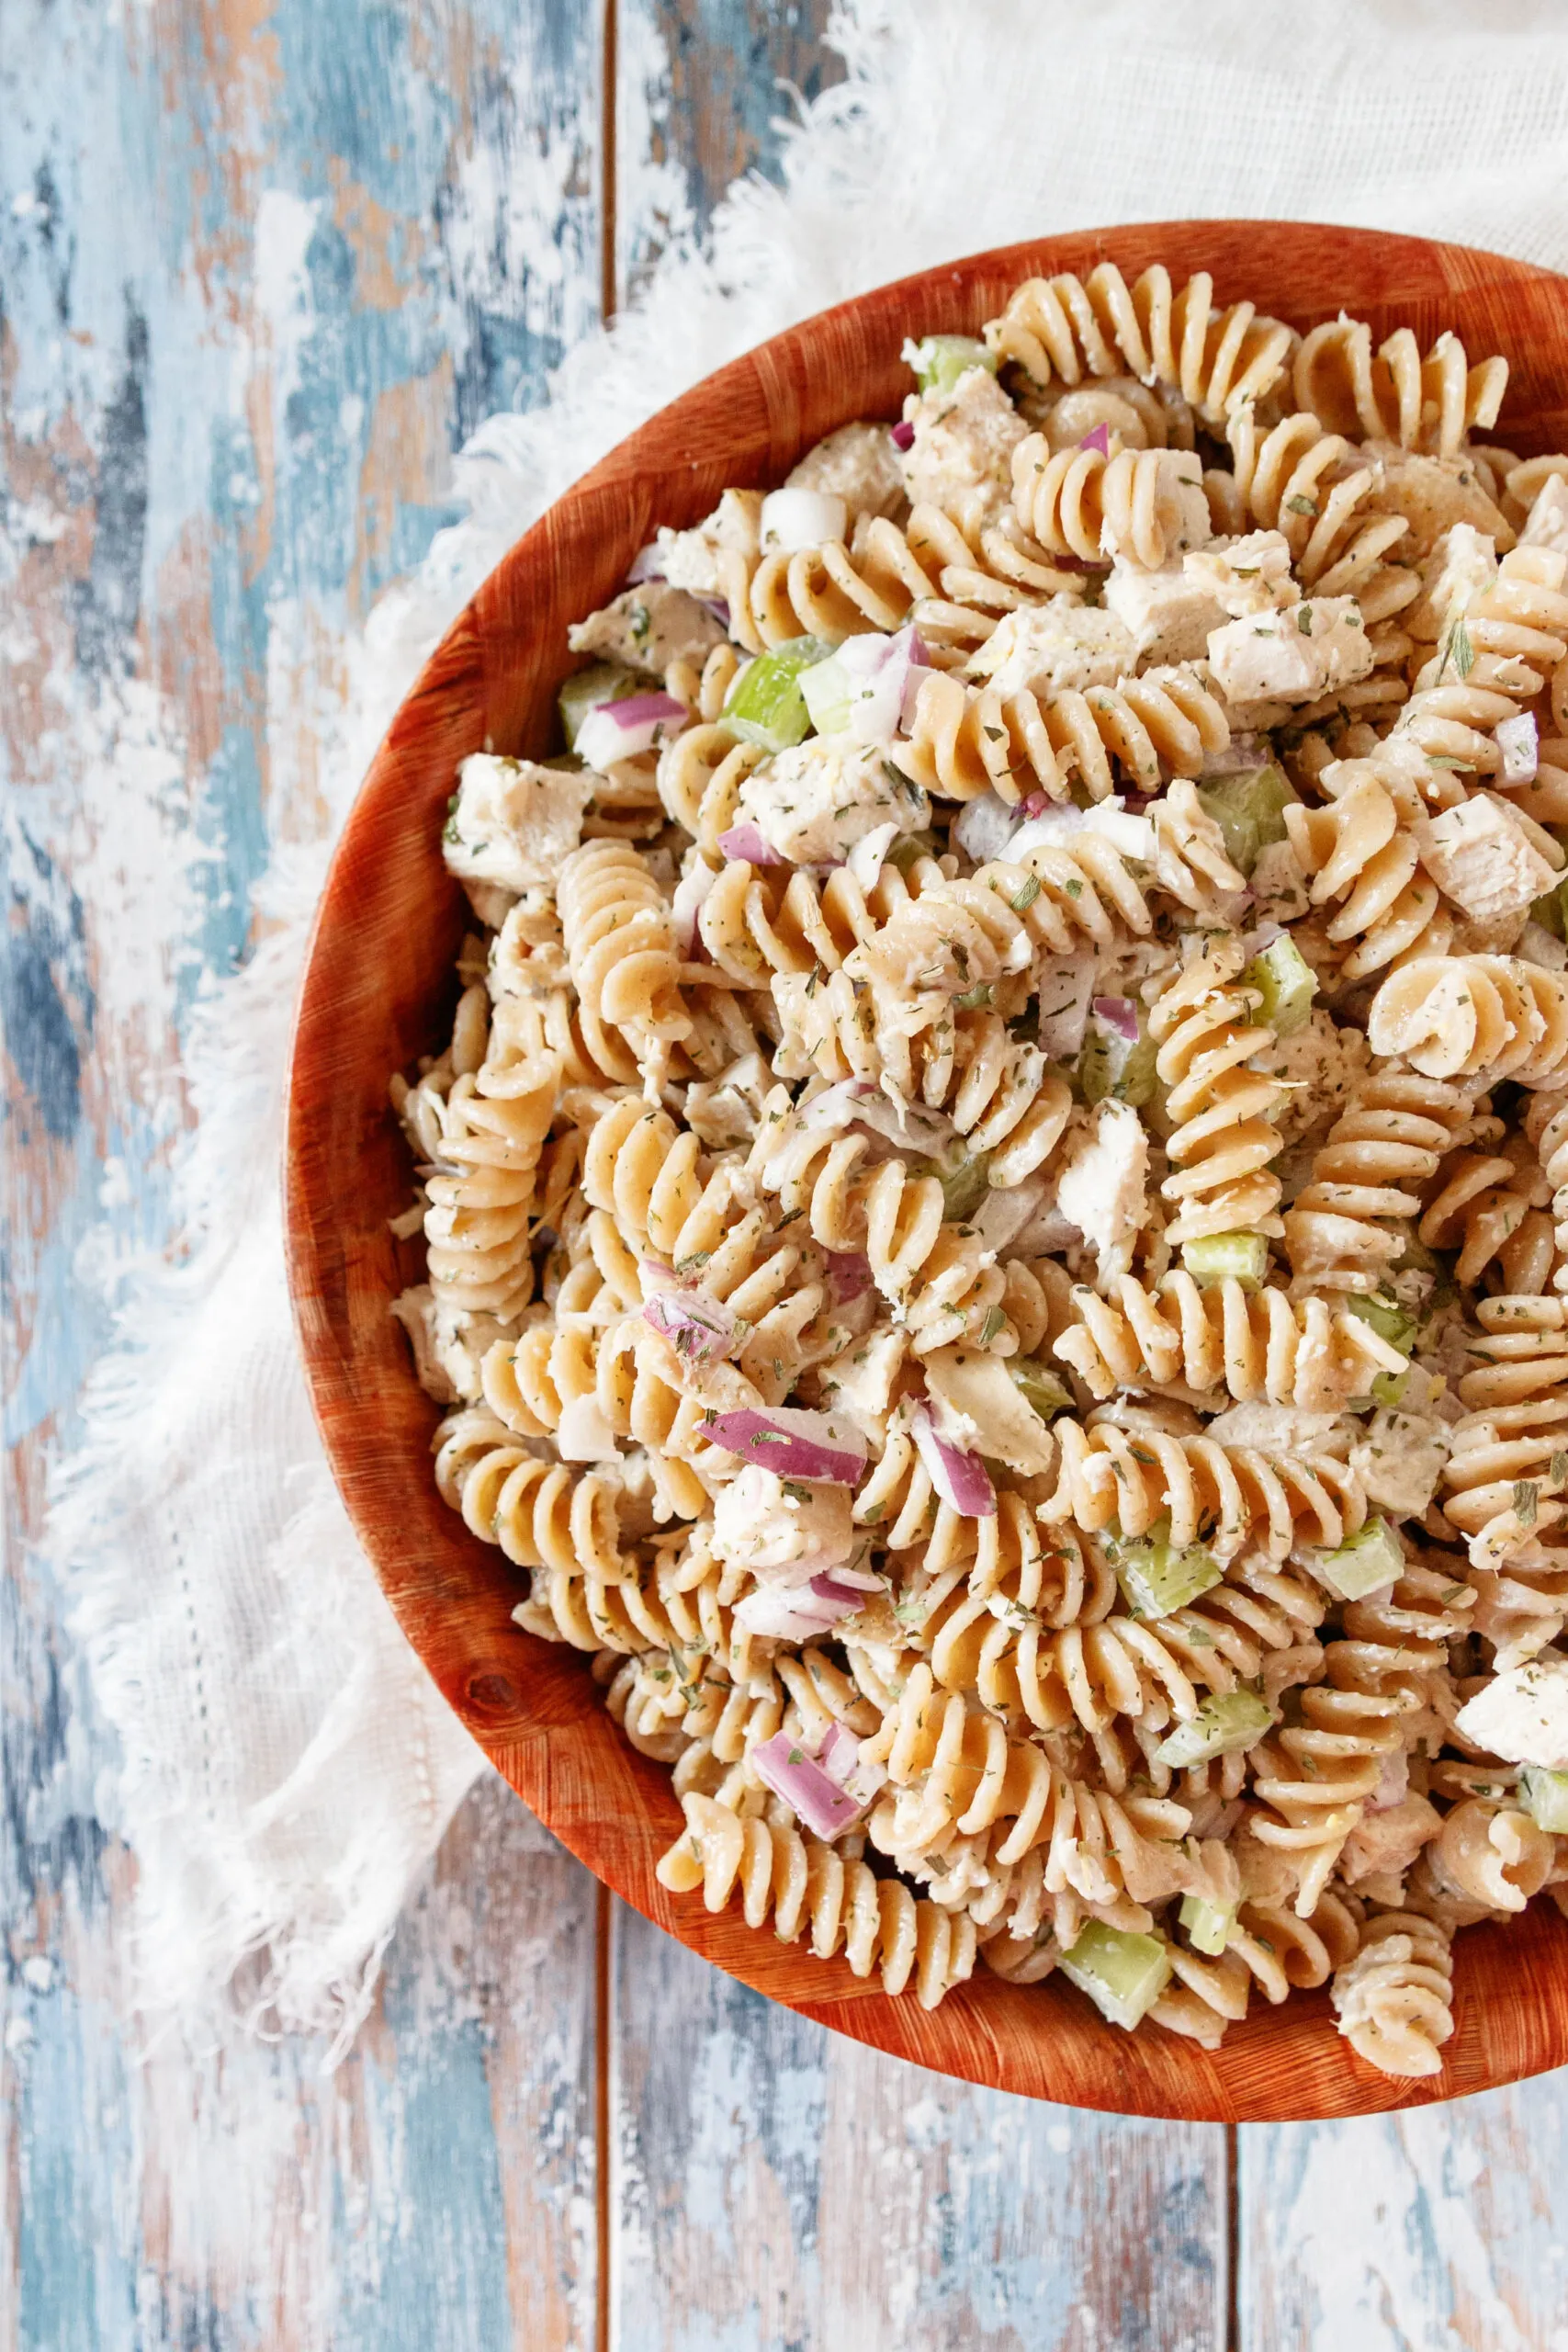 top view of the whole wheat pasta salad on a mottled blue background